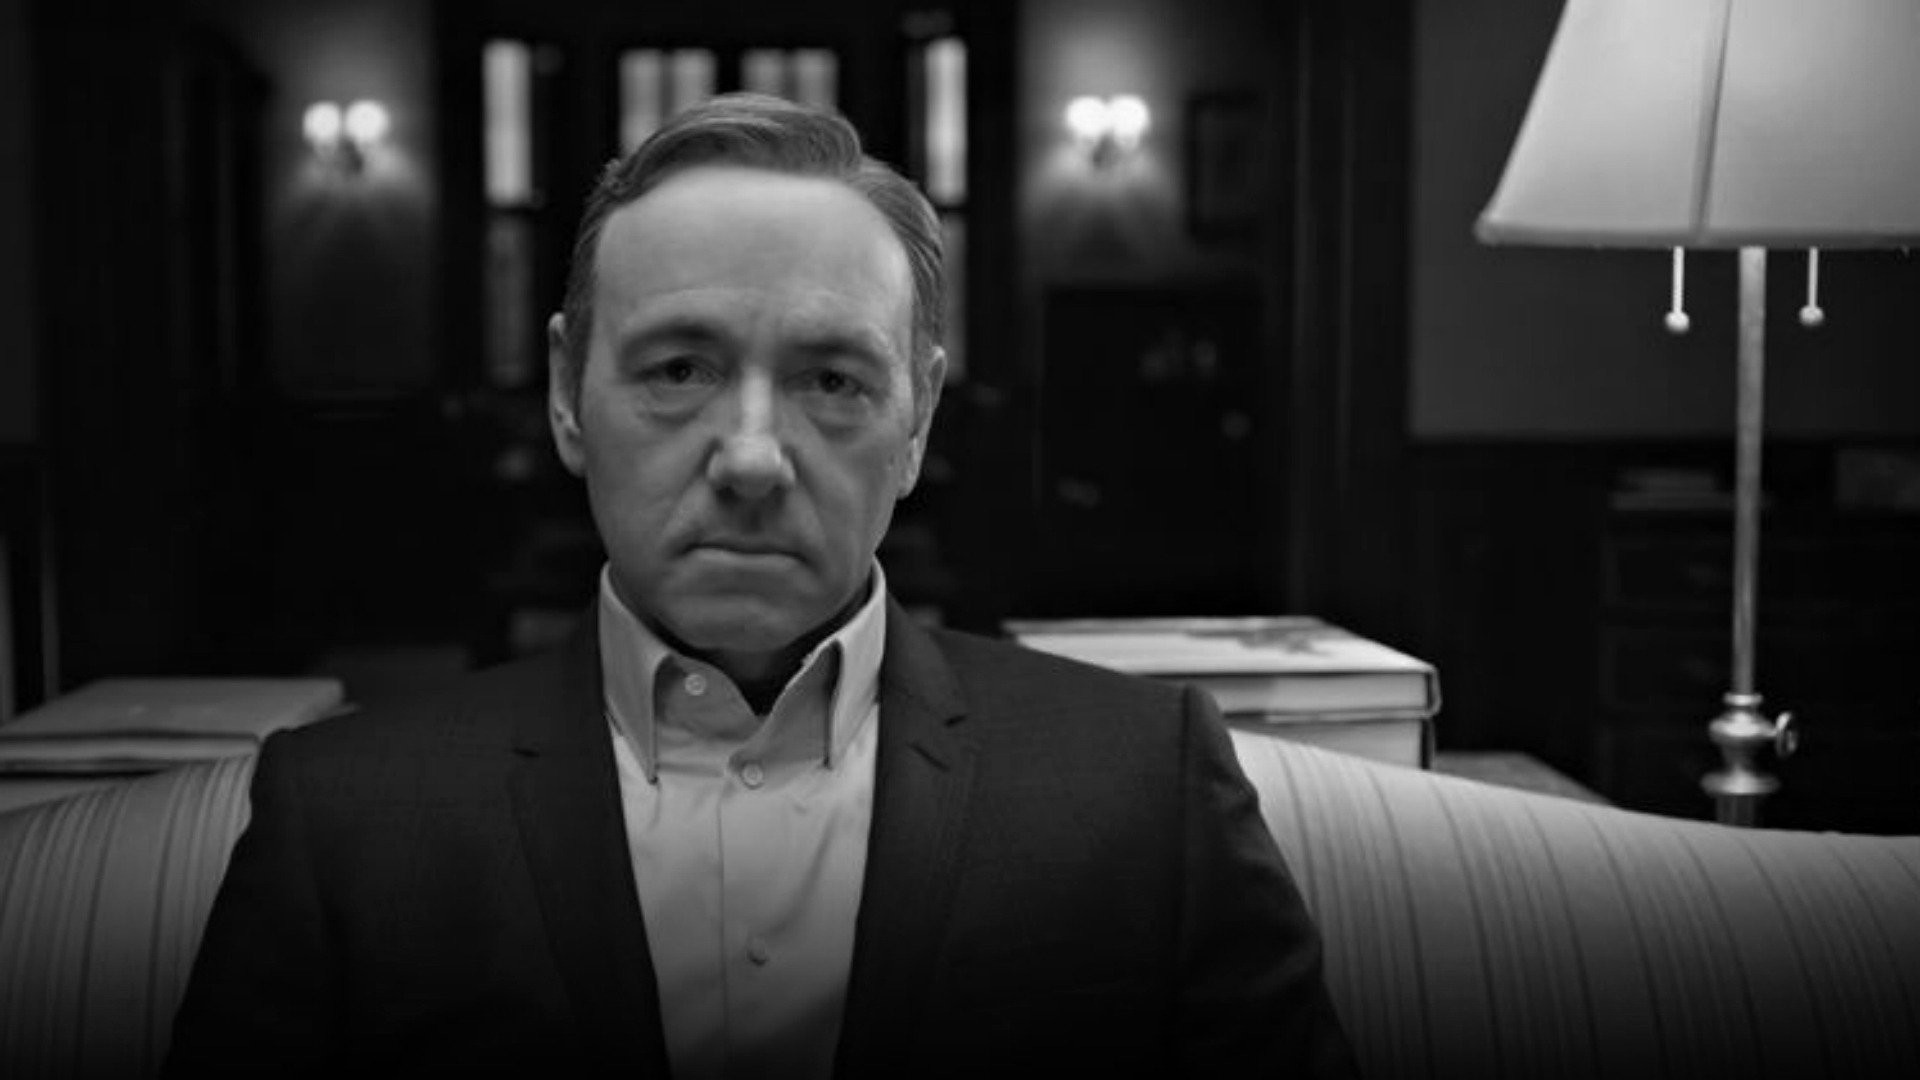 1920x1080 HOUSE OF CARDS political drama series (32) wallpaper |  | 378012 |  WallpaperUP